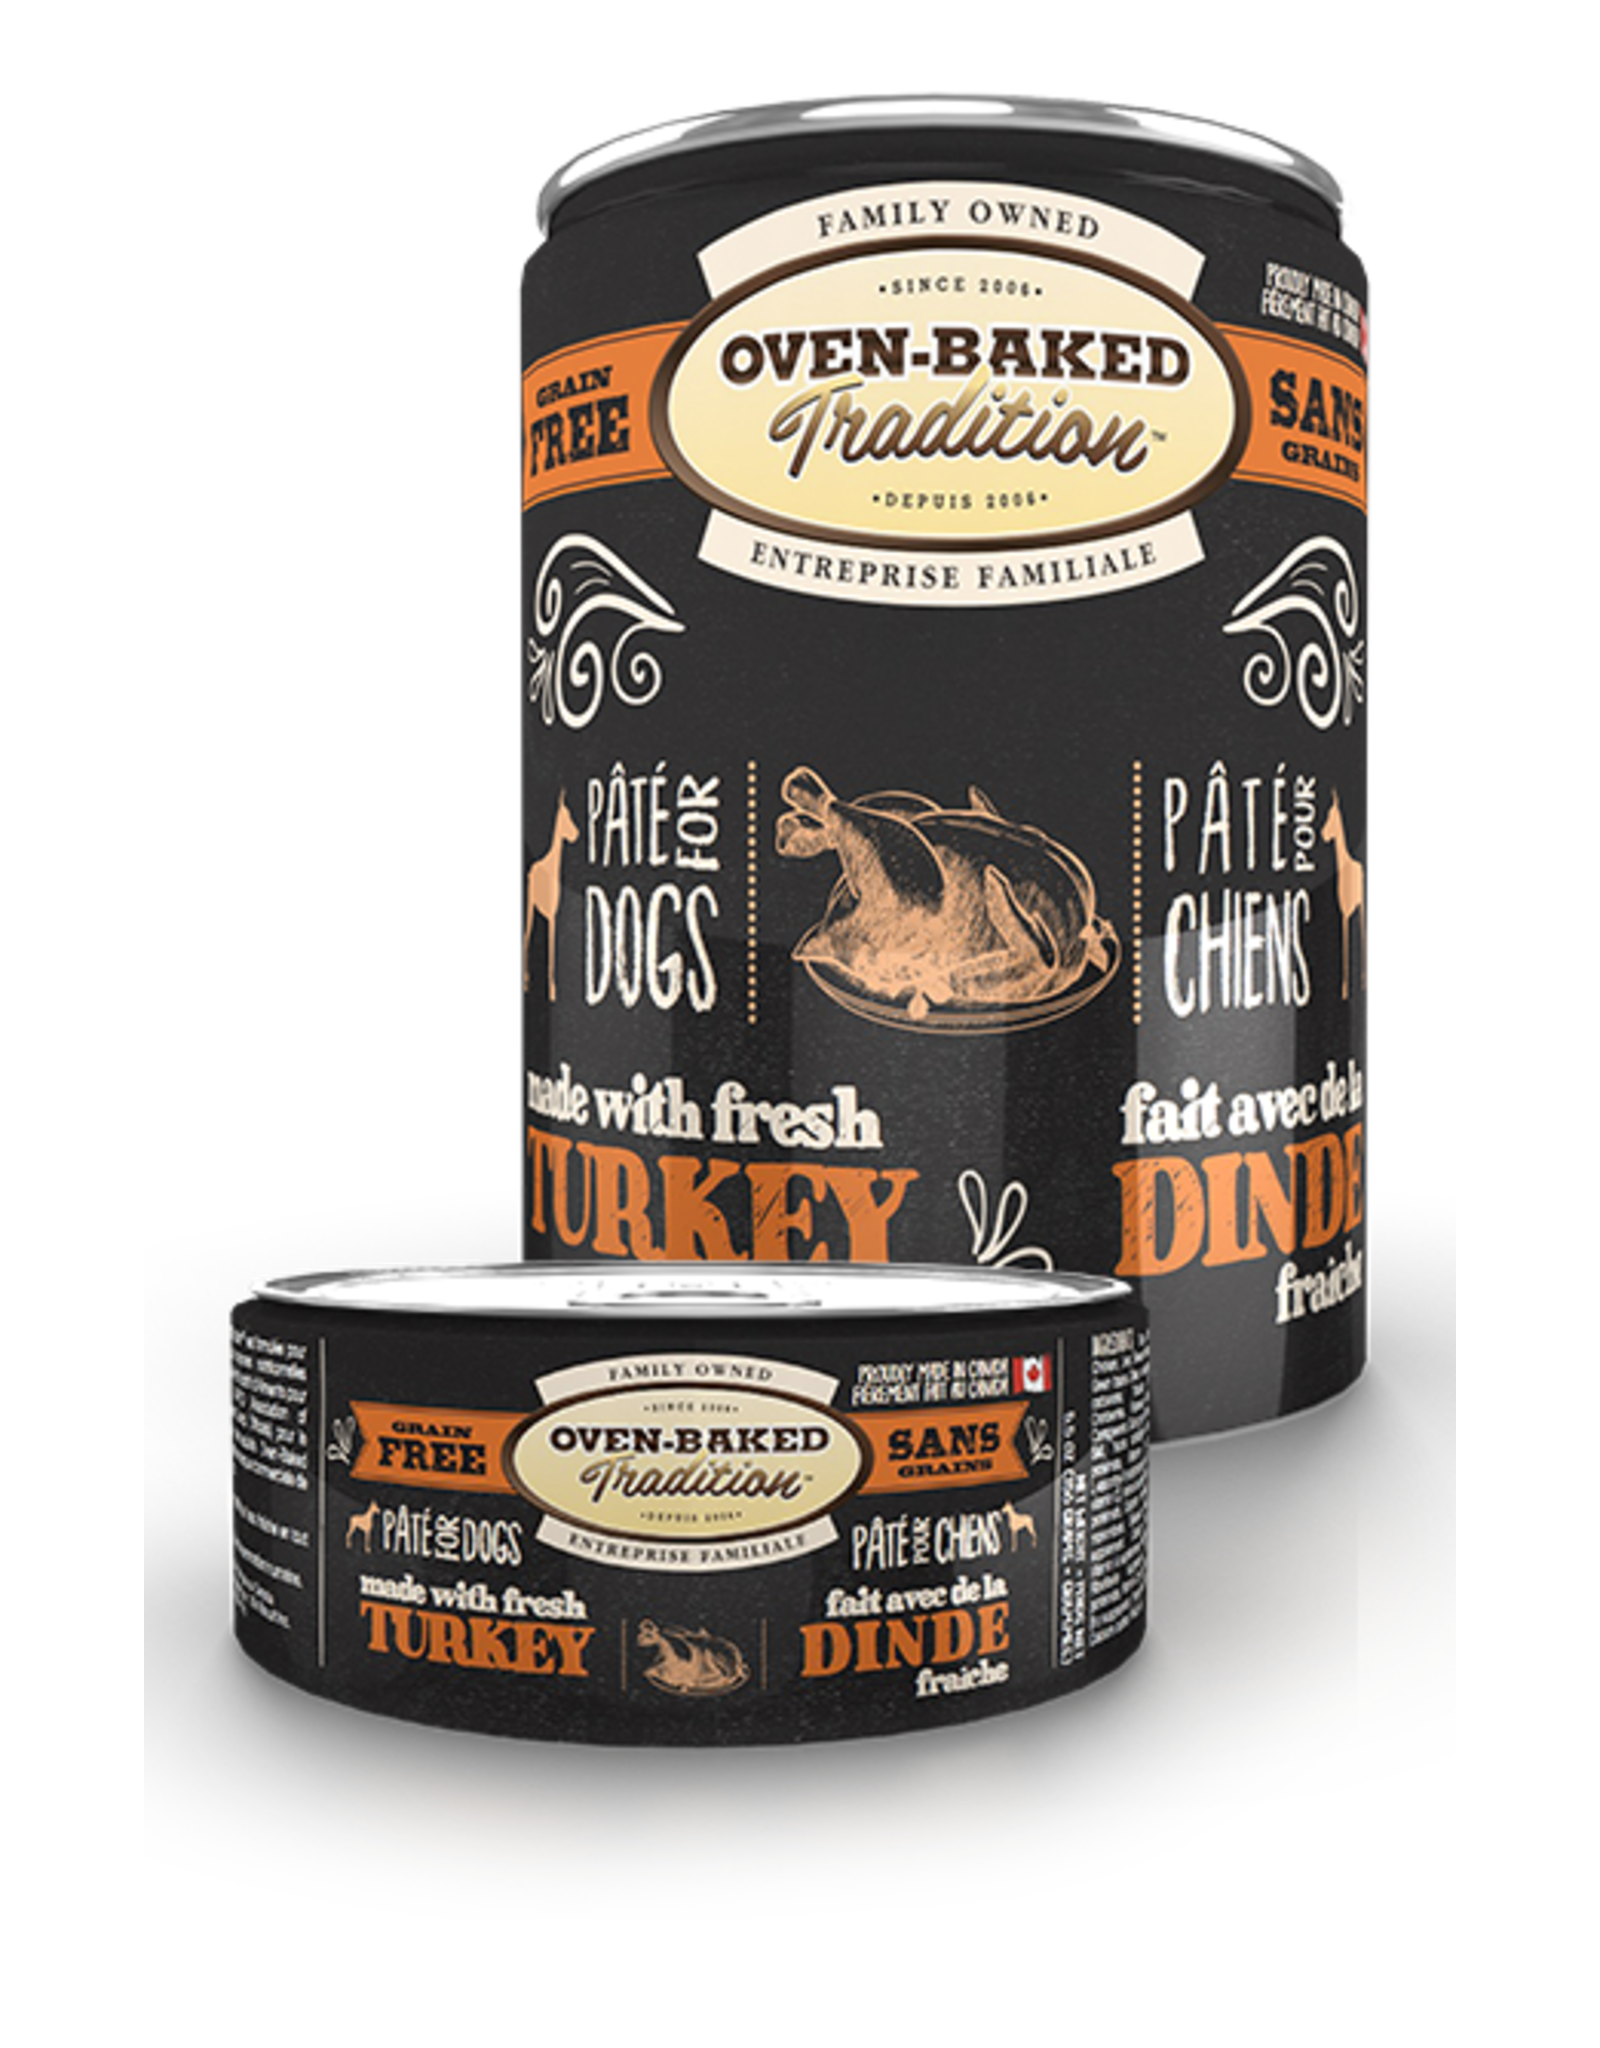 Oven-Baked Tradition Oven-Baked Paté Dinde 12.5oz